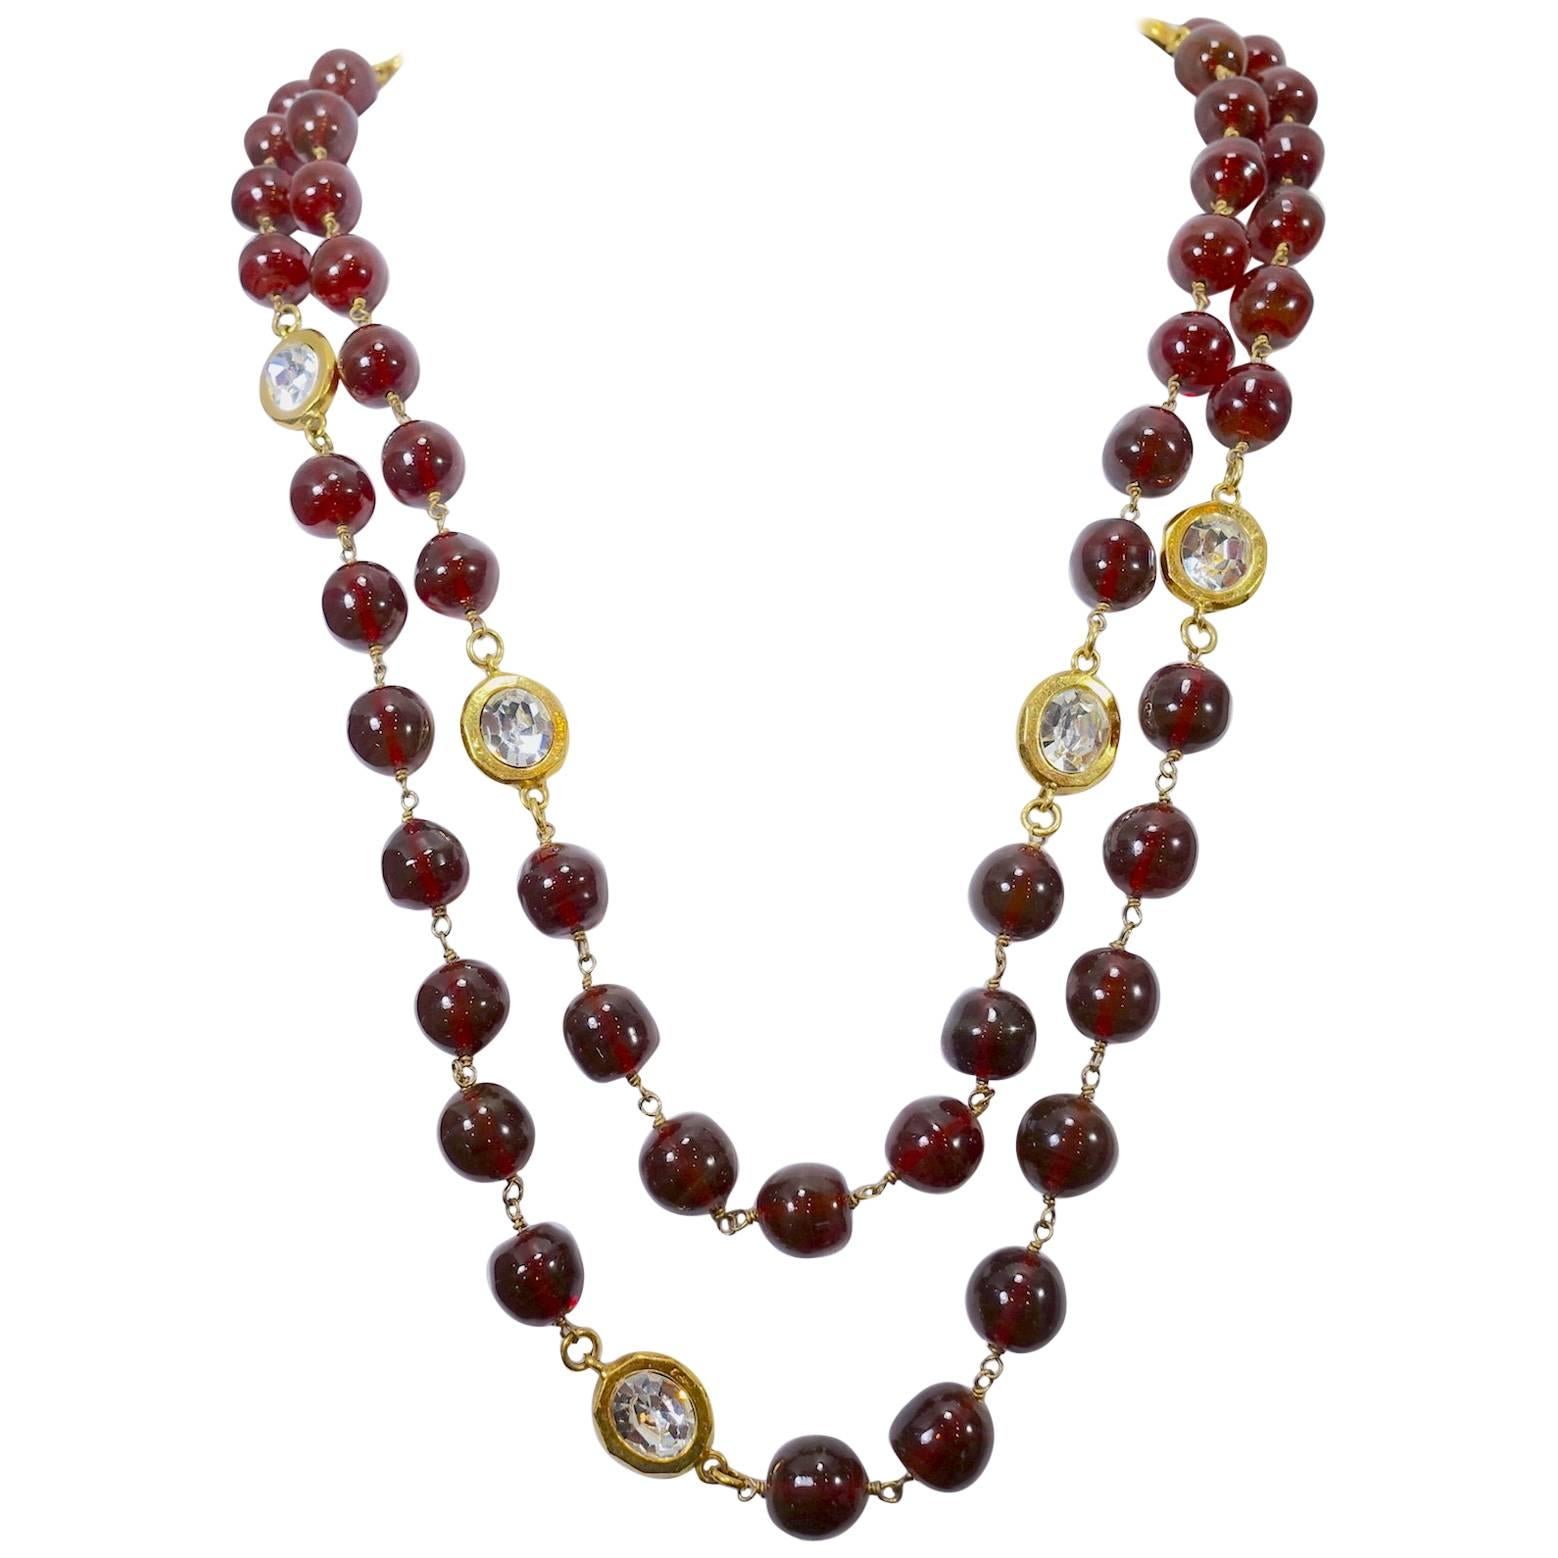 Vintage Signed Chanel 70s Cranberry Gripoix Glass and Crystal Sautoir Necklace